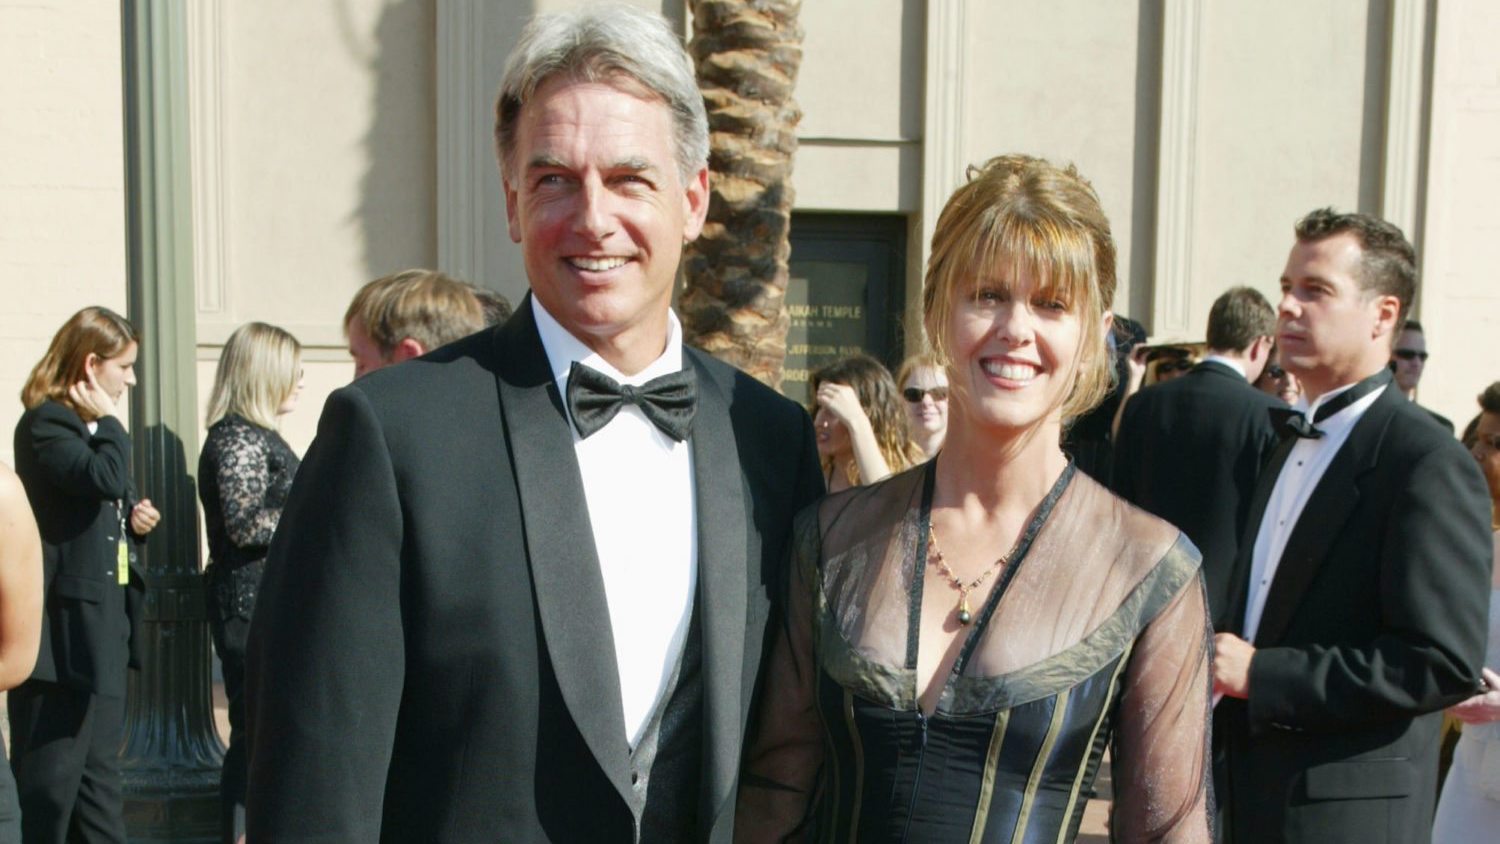 Mark Harmon And Pam Dawber Marriage - Simplemost1500 x 844